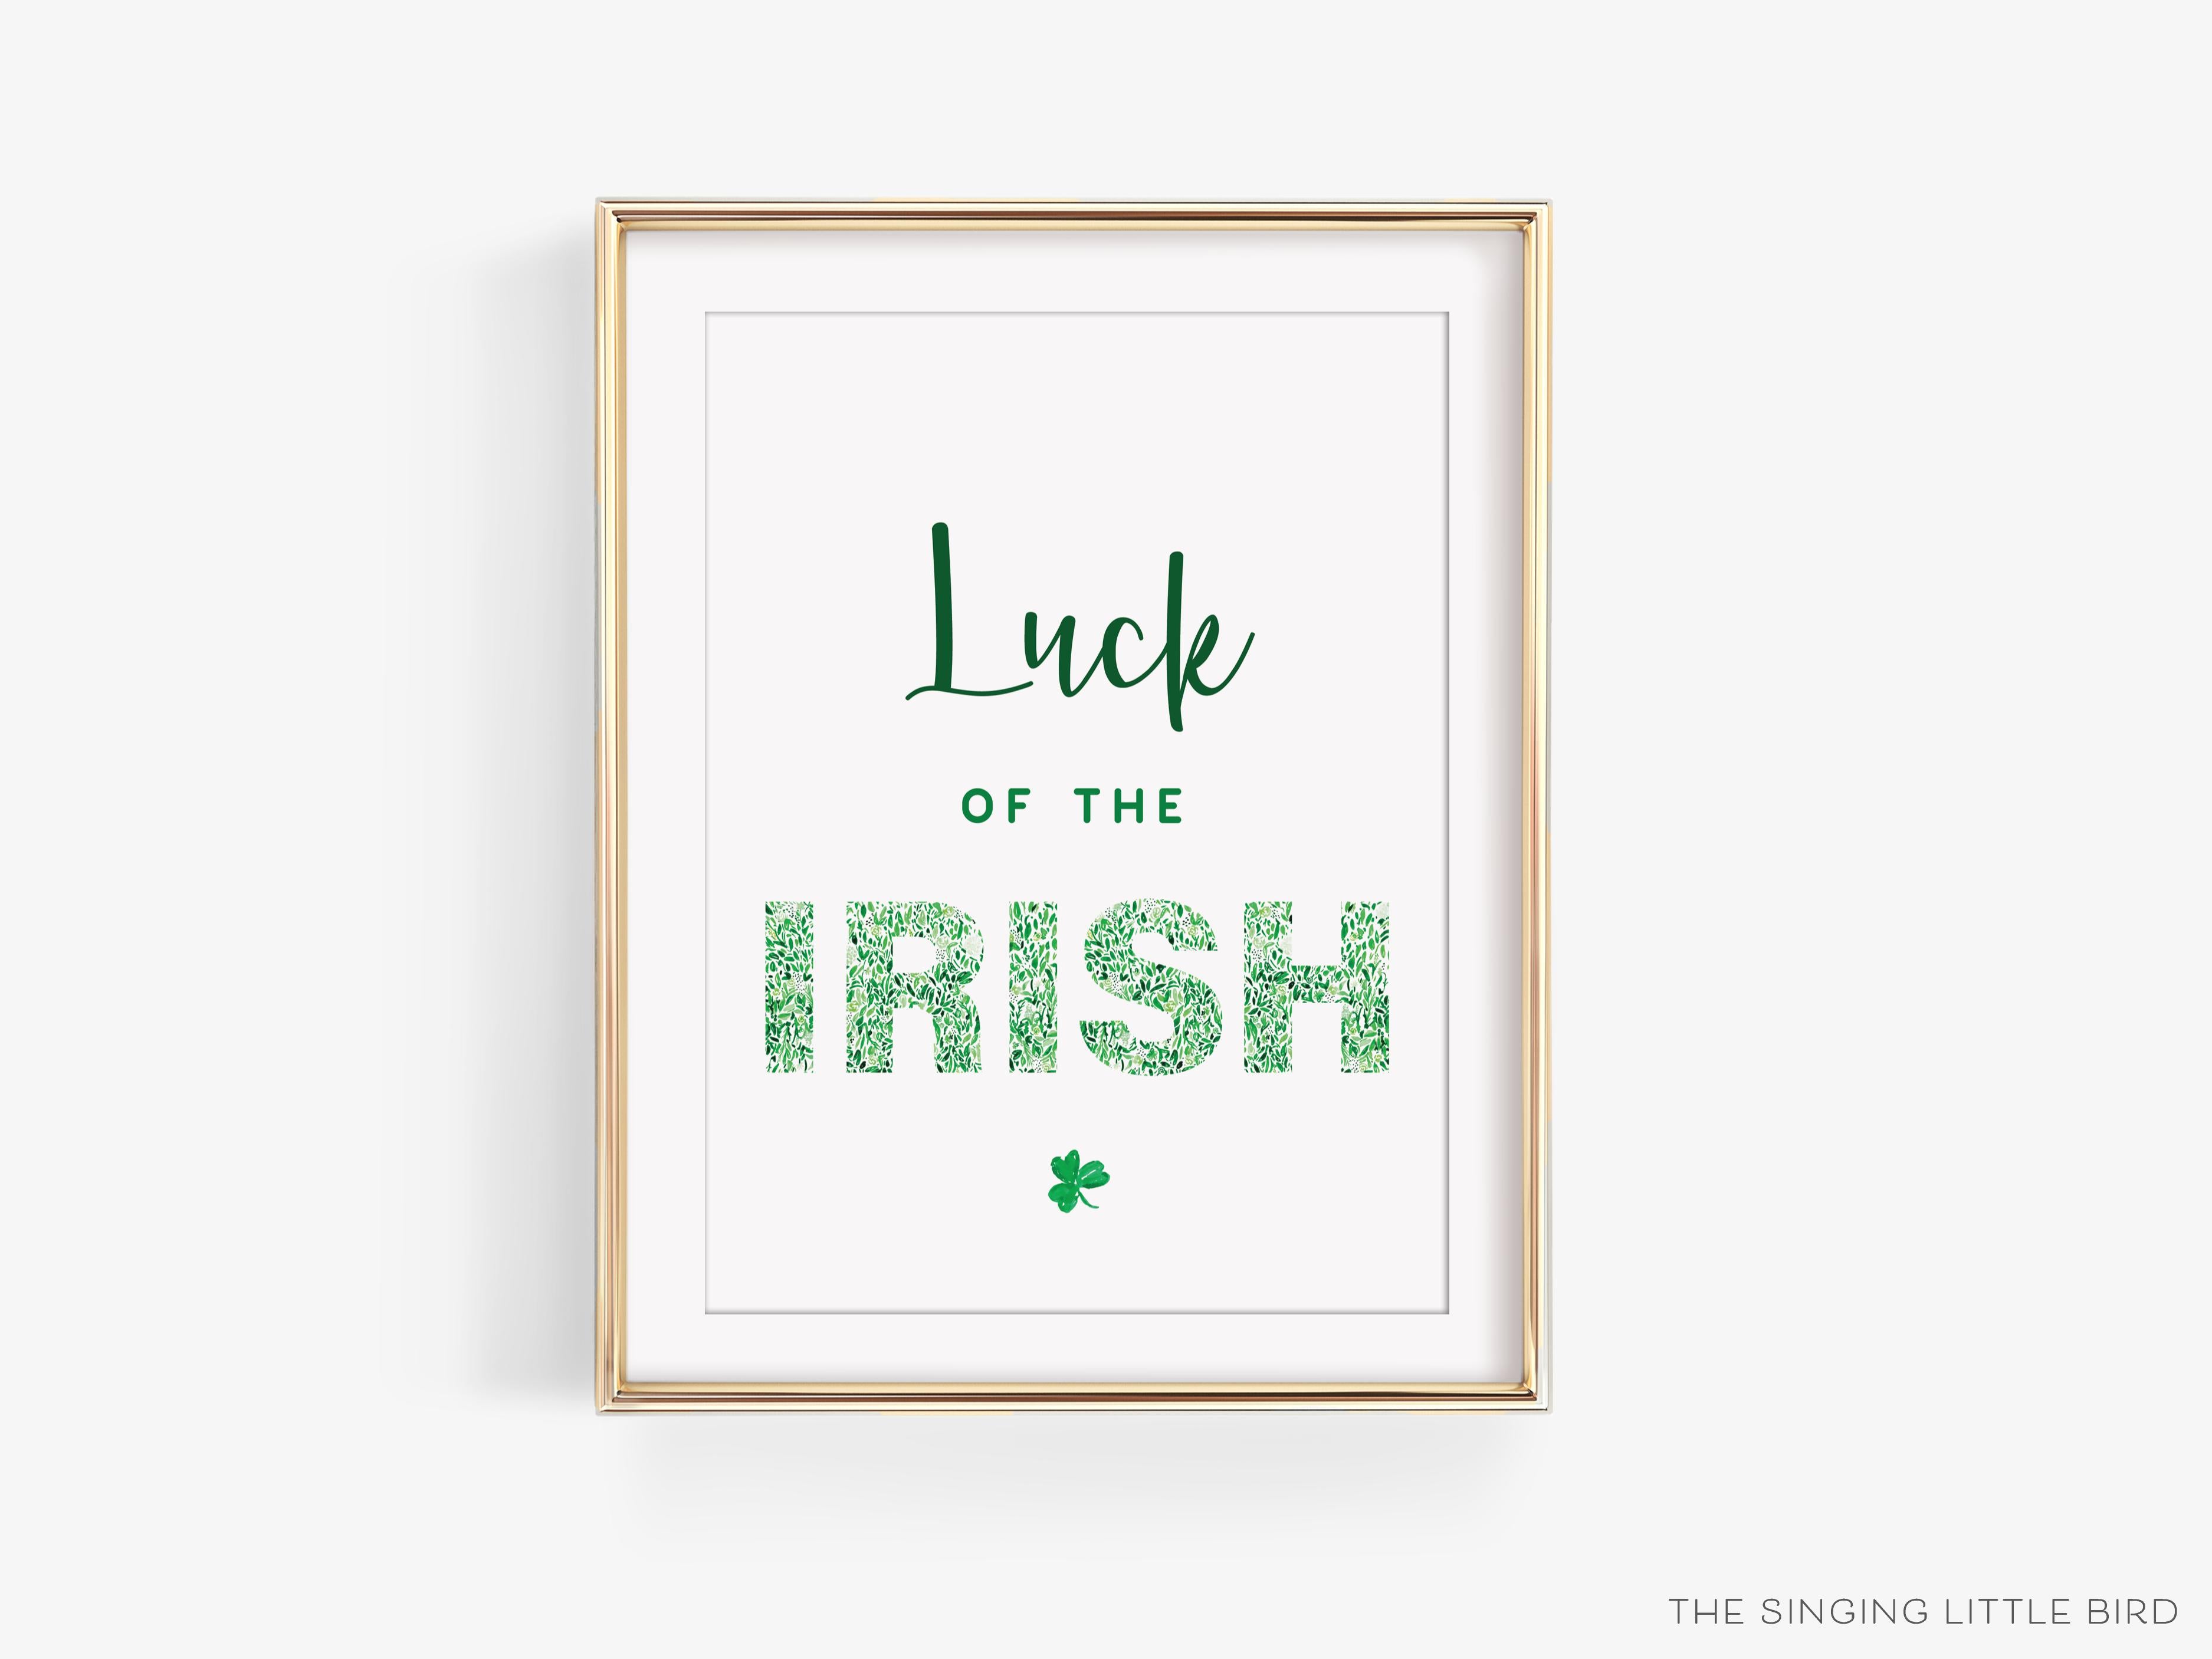 Luck of The Irish Art Print-This watercolor art print features our hand-painted green floral pattern and shamrock, printed in the USA on 120lb high quality art paper. This makes a great gift or wall decor for the Irish lover in your life.-The Singing Little Bird